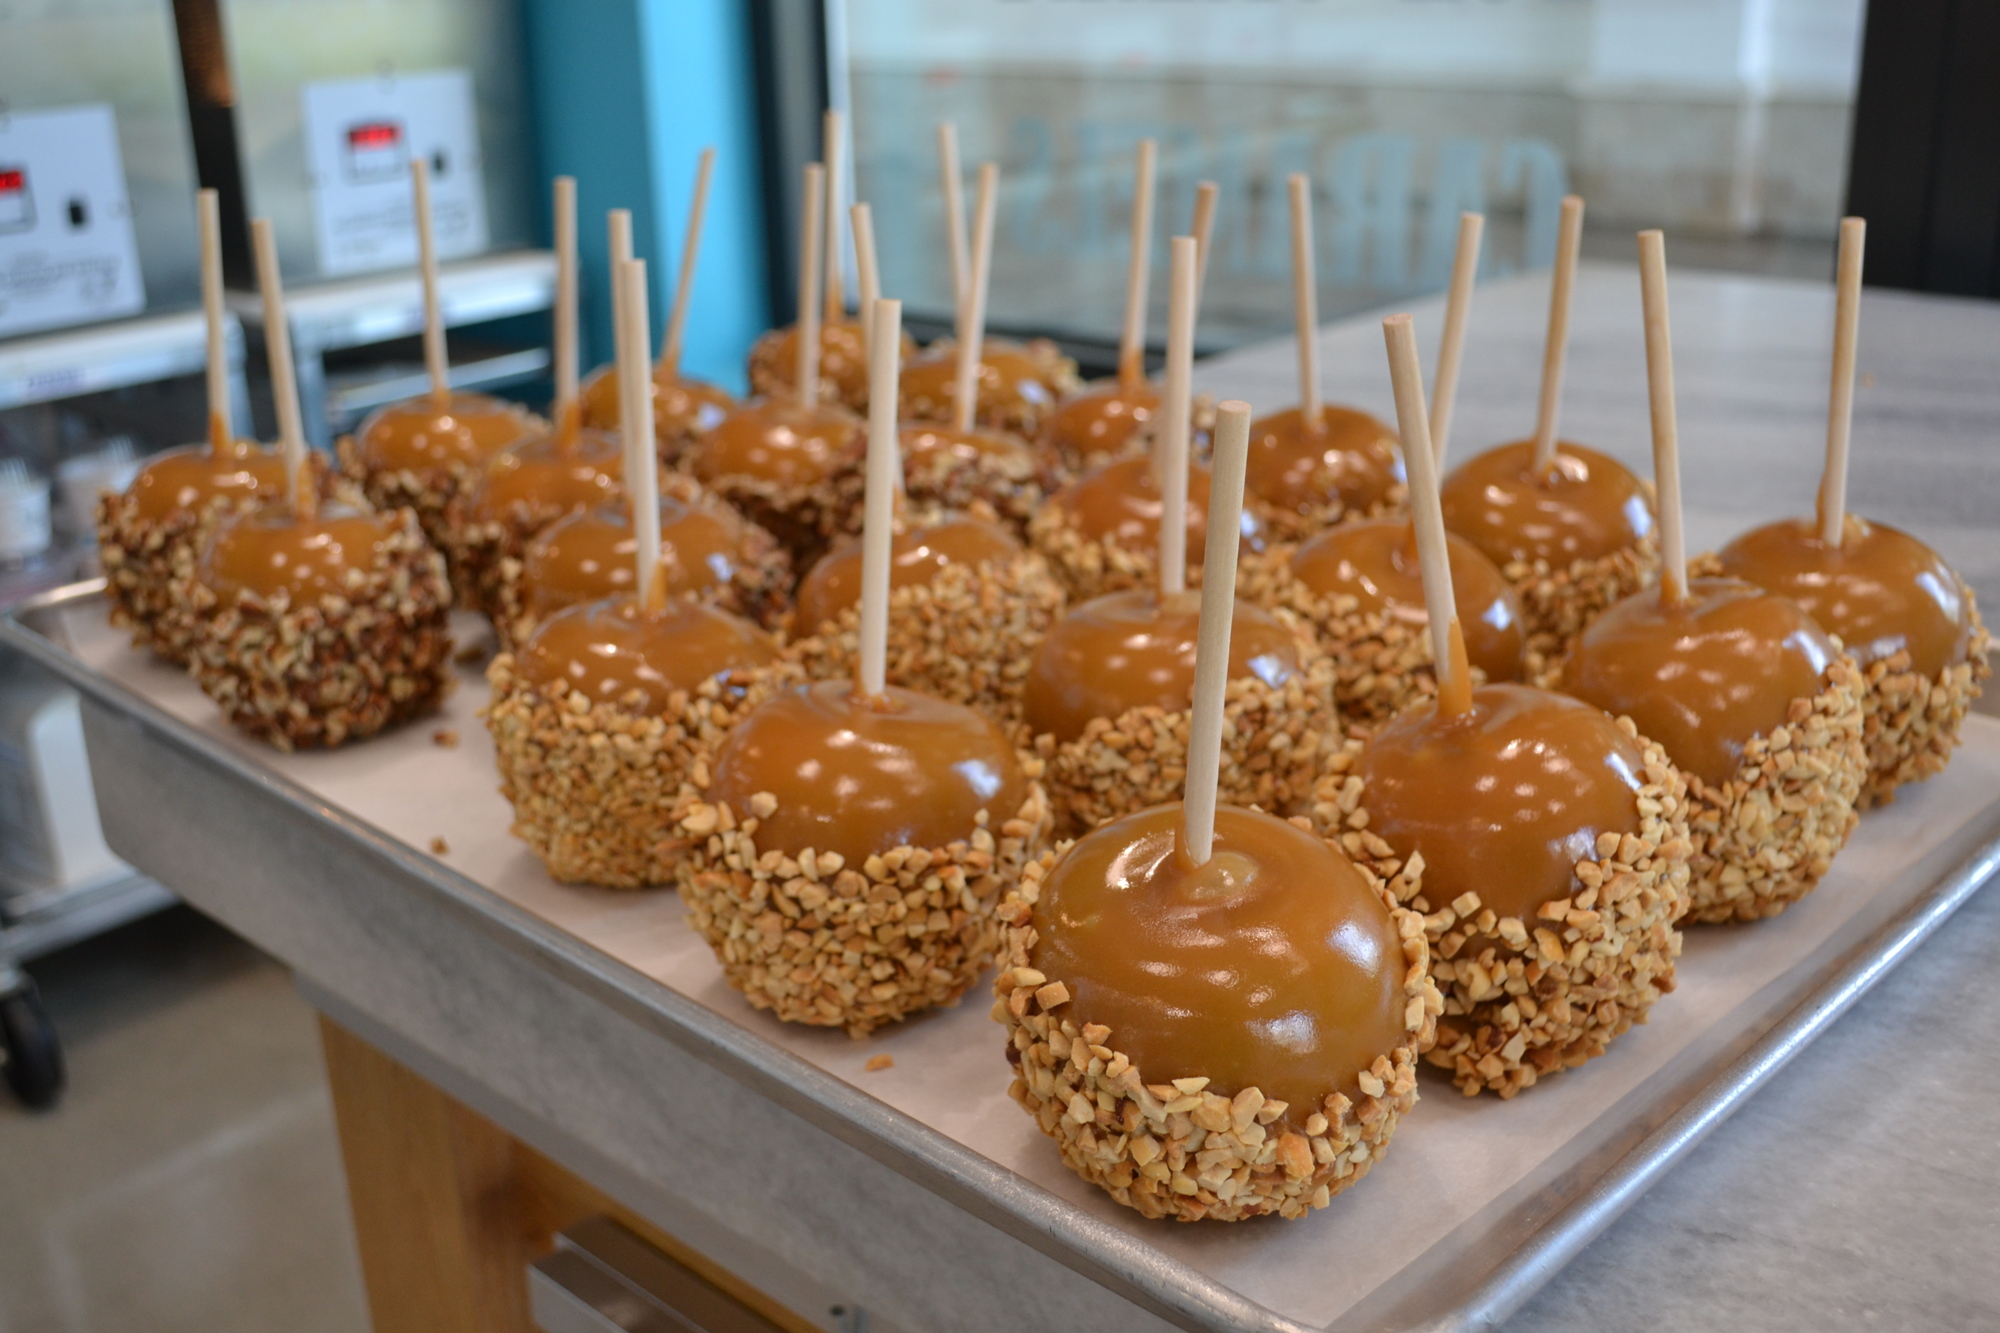 A tray of caramel apples stands ready to entice customers.